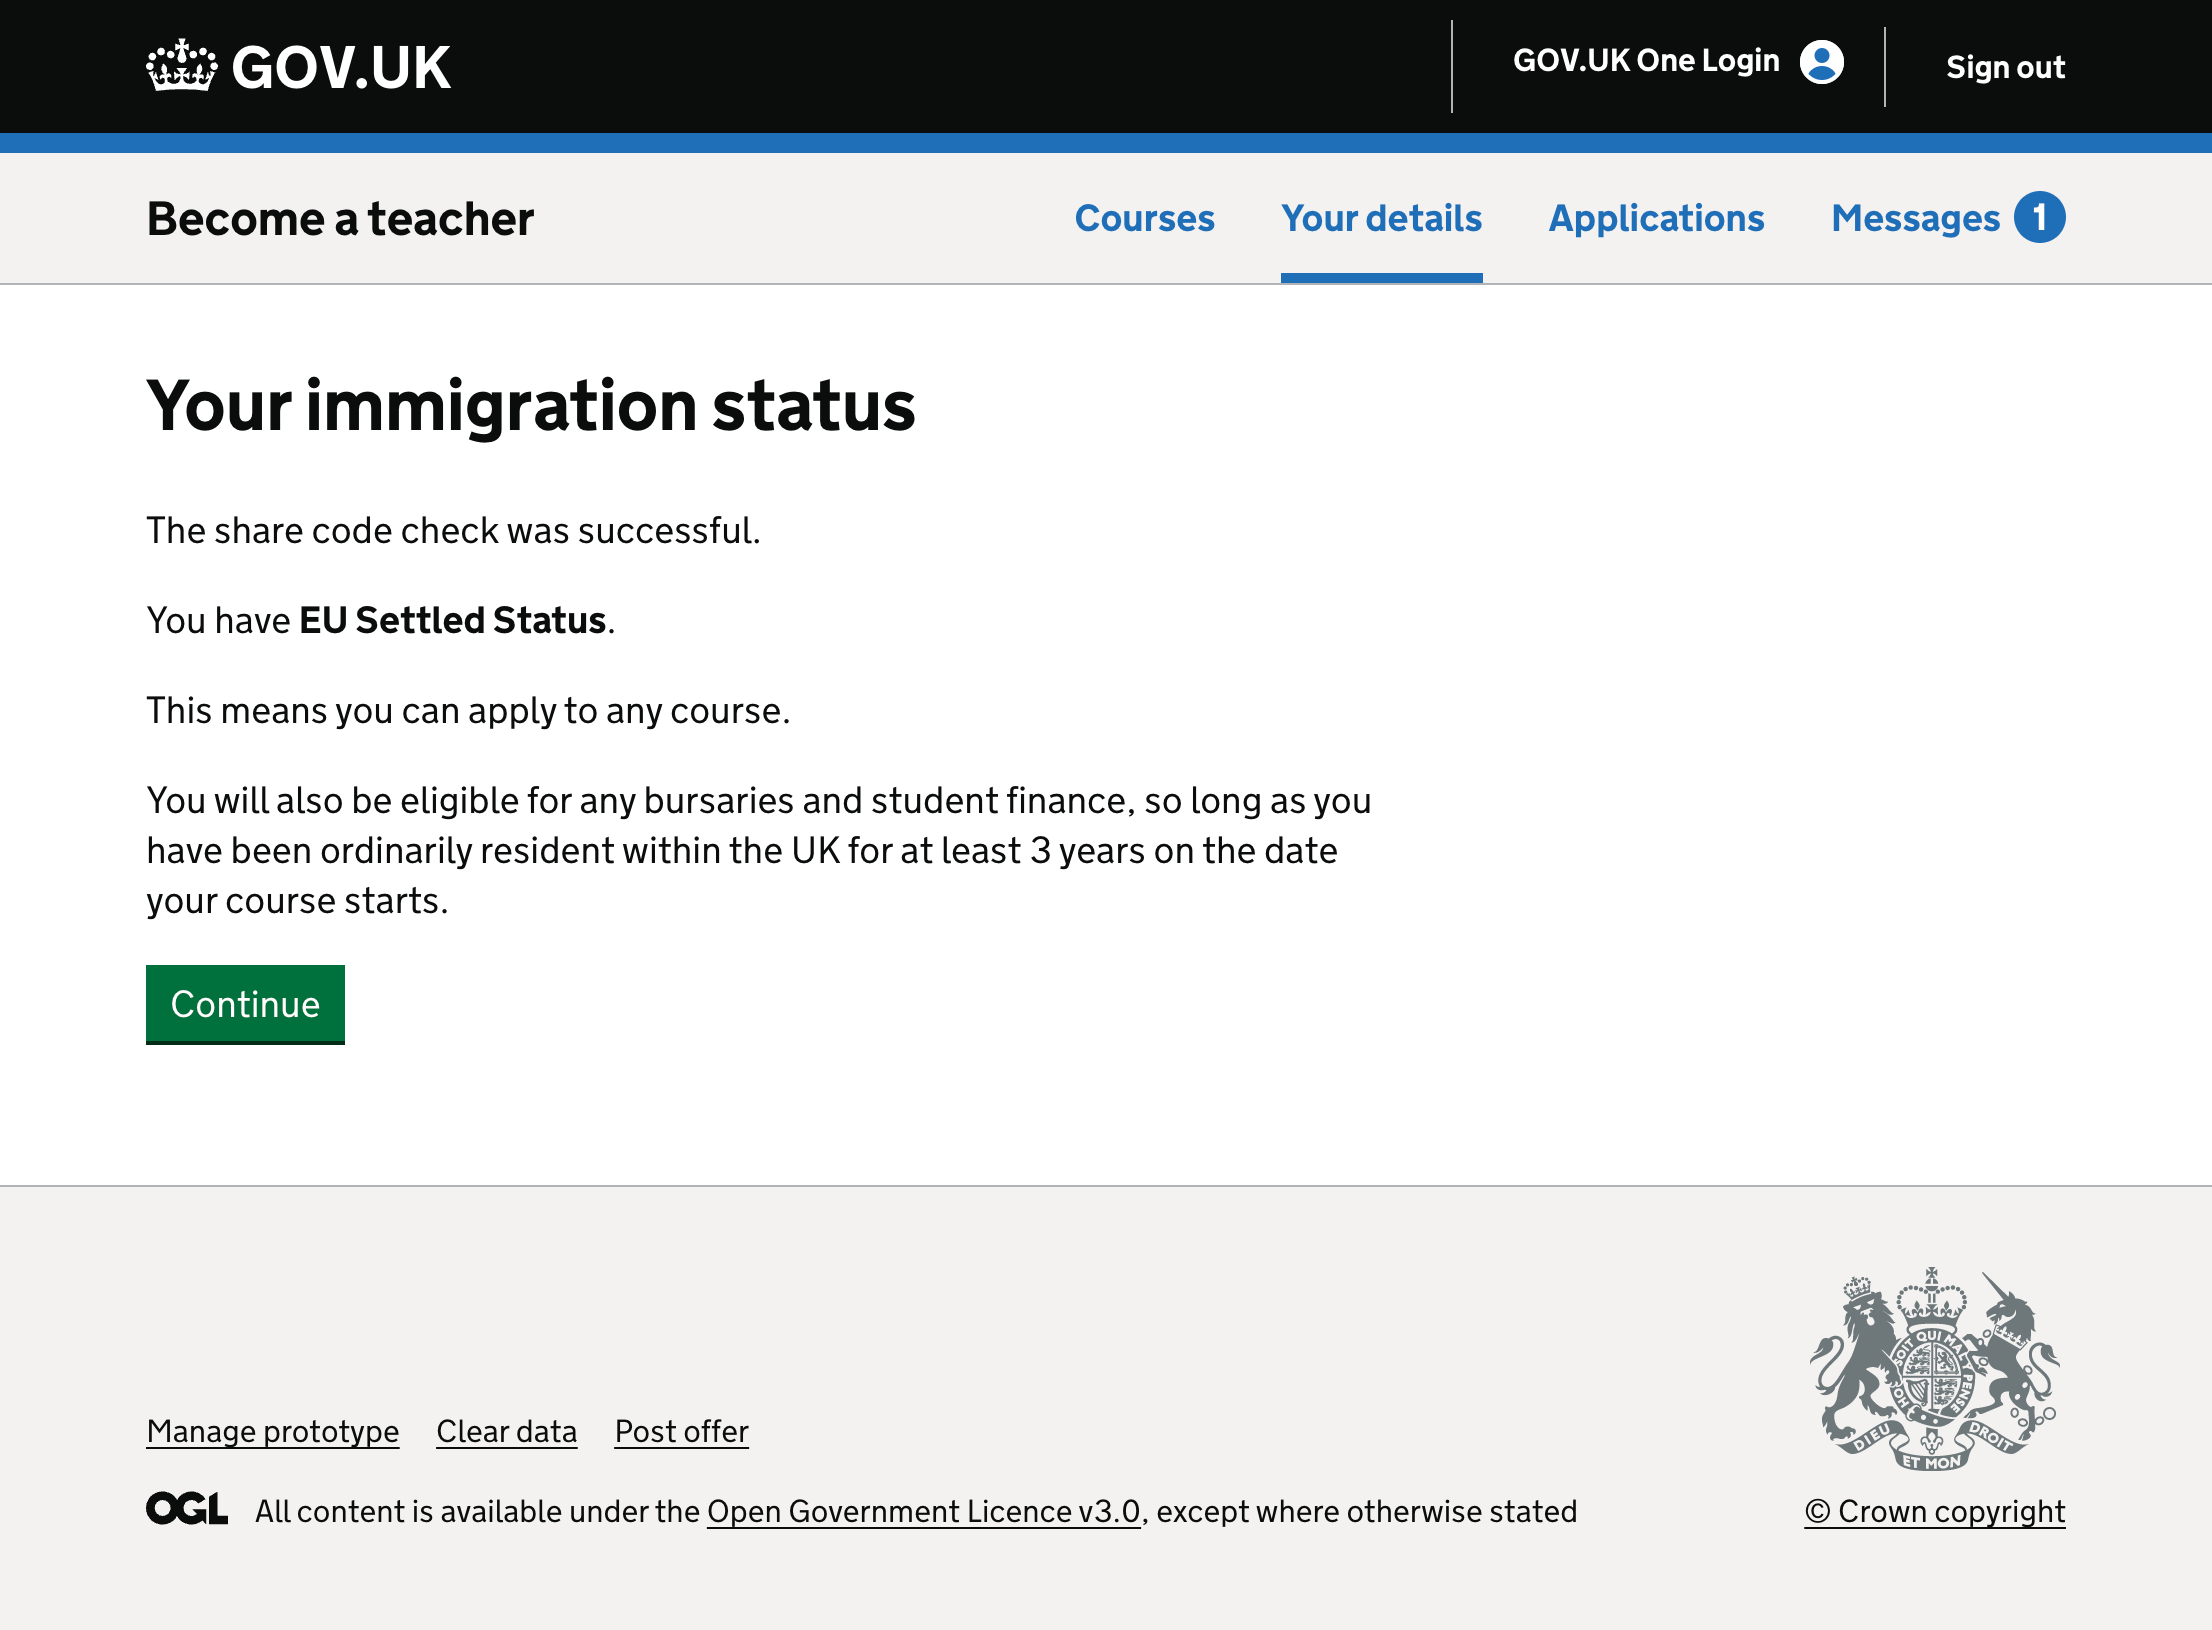 Screenshot showing a page where a share code check was successful and the candidate has EU settled status